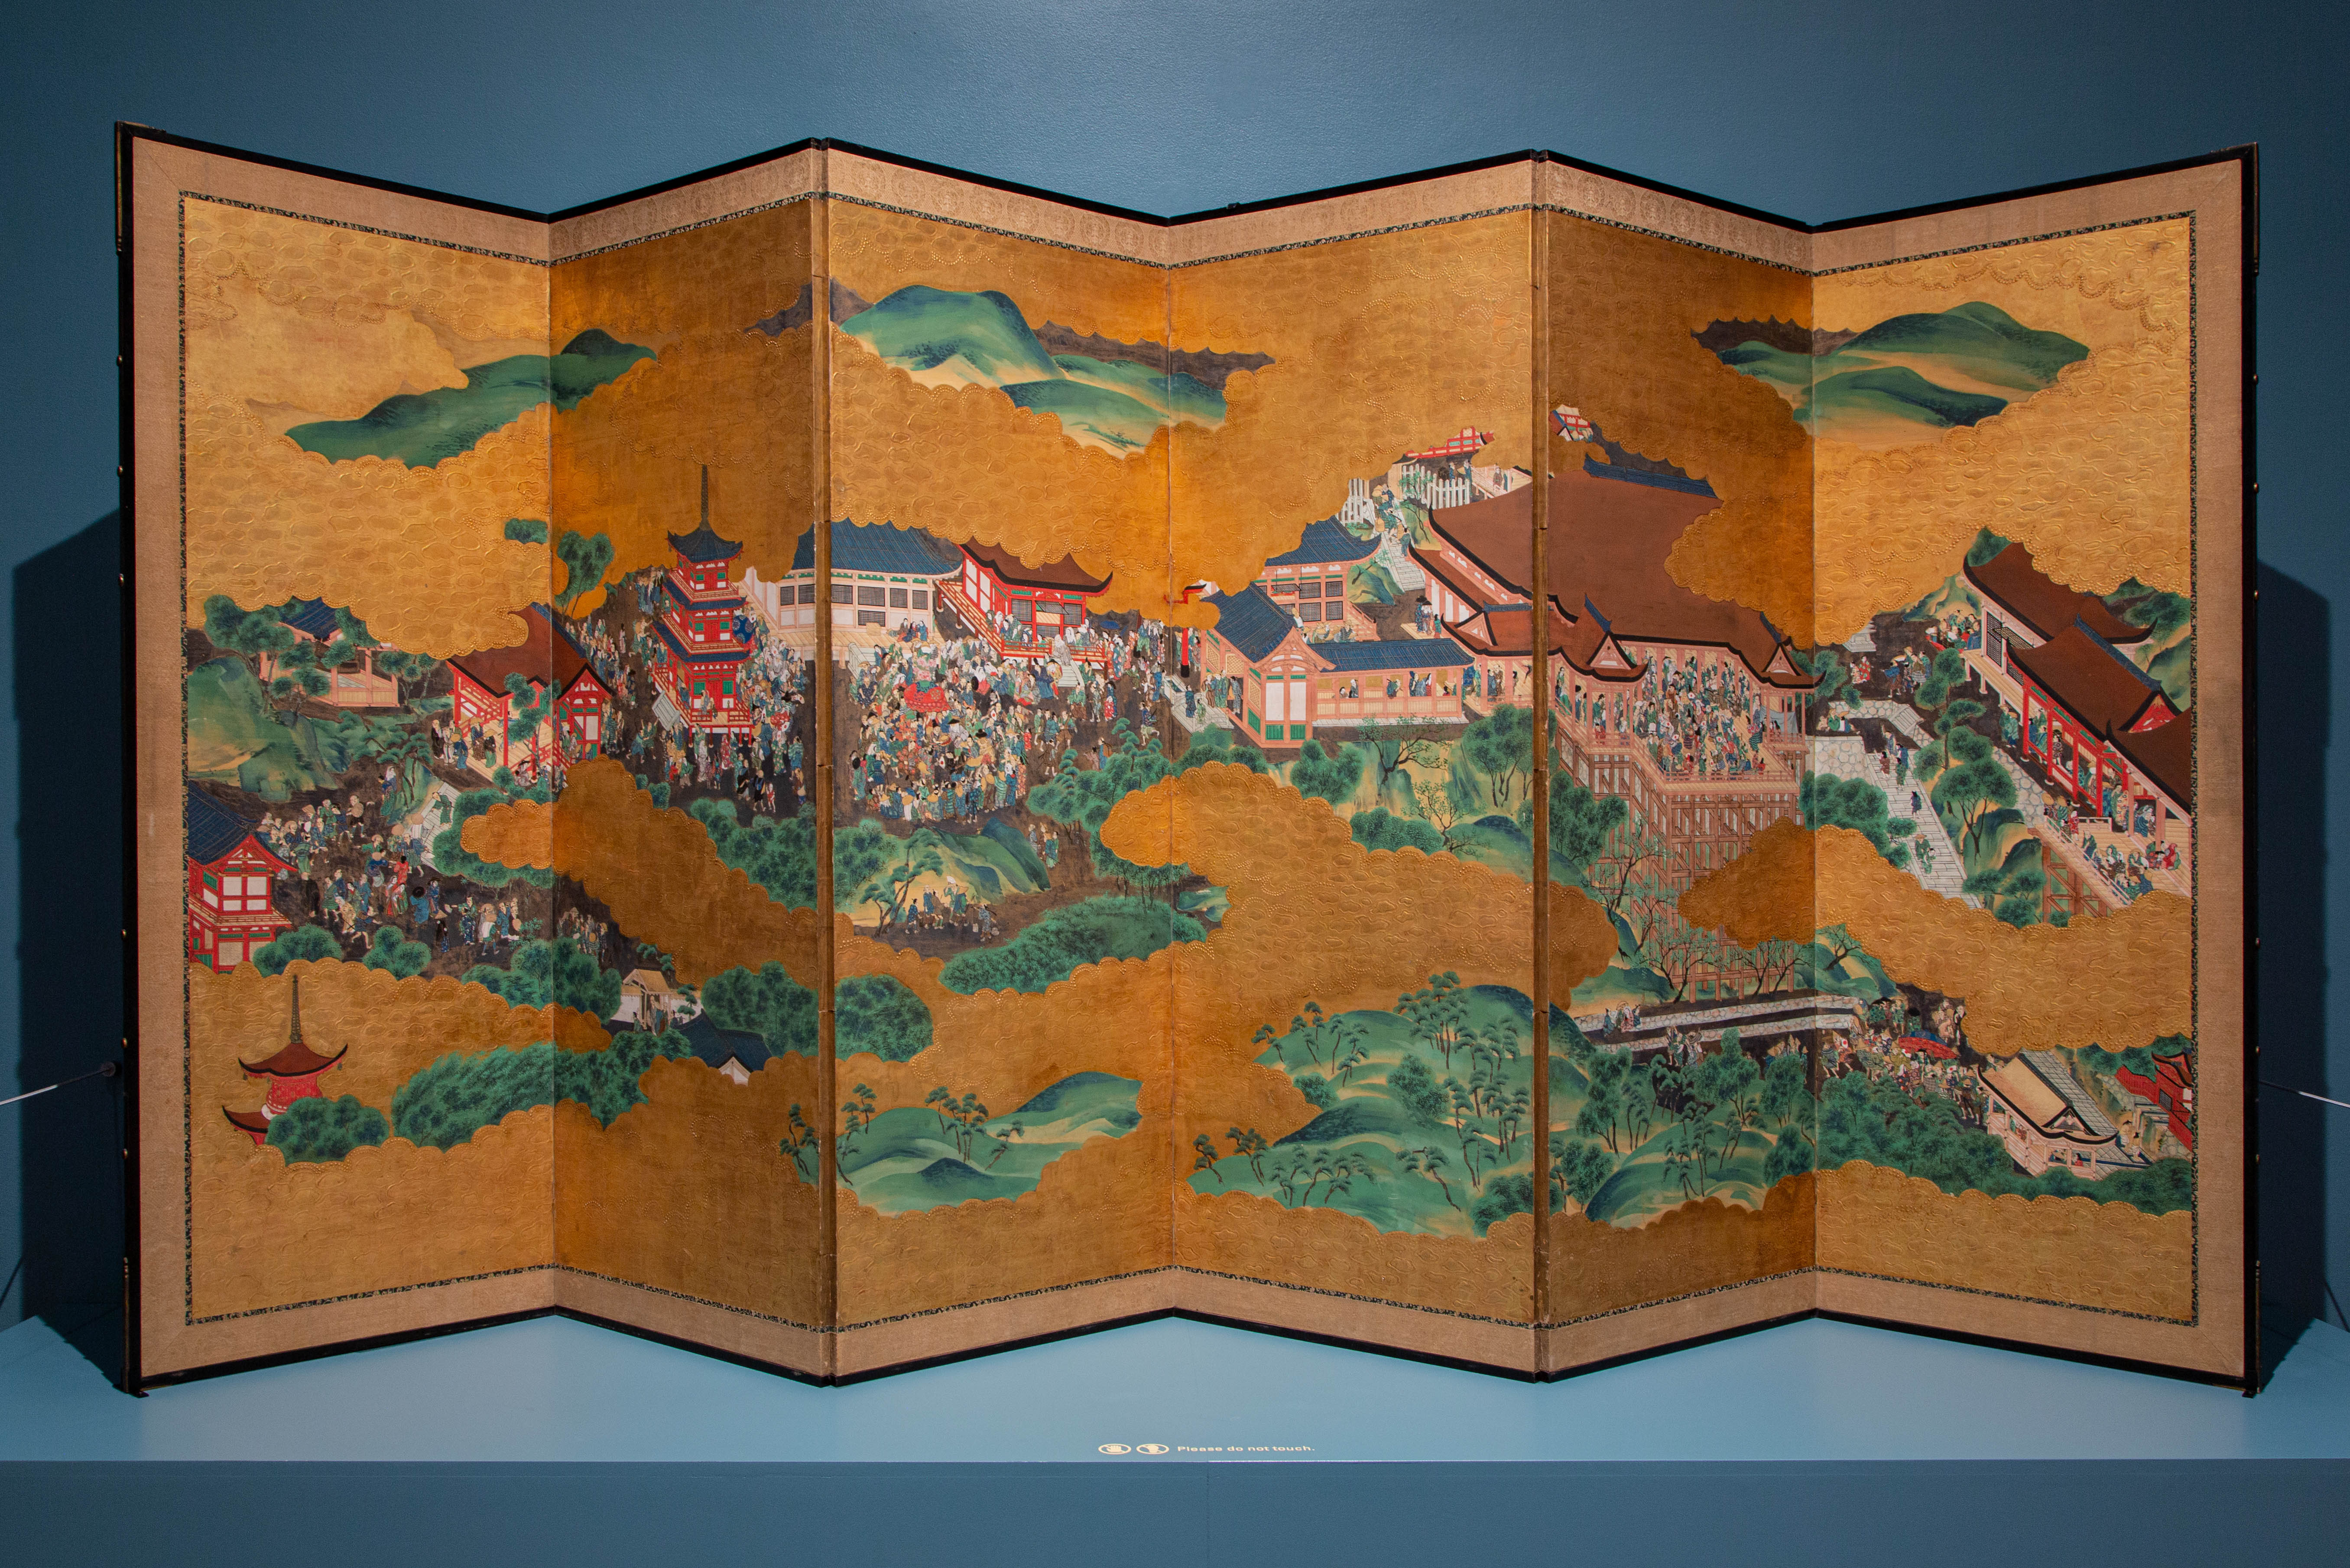  The Kiyomizu Temple, 1825 Japanese ink, gouache, paper, wood, silk, and gold leaf